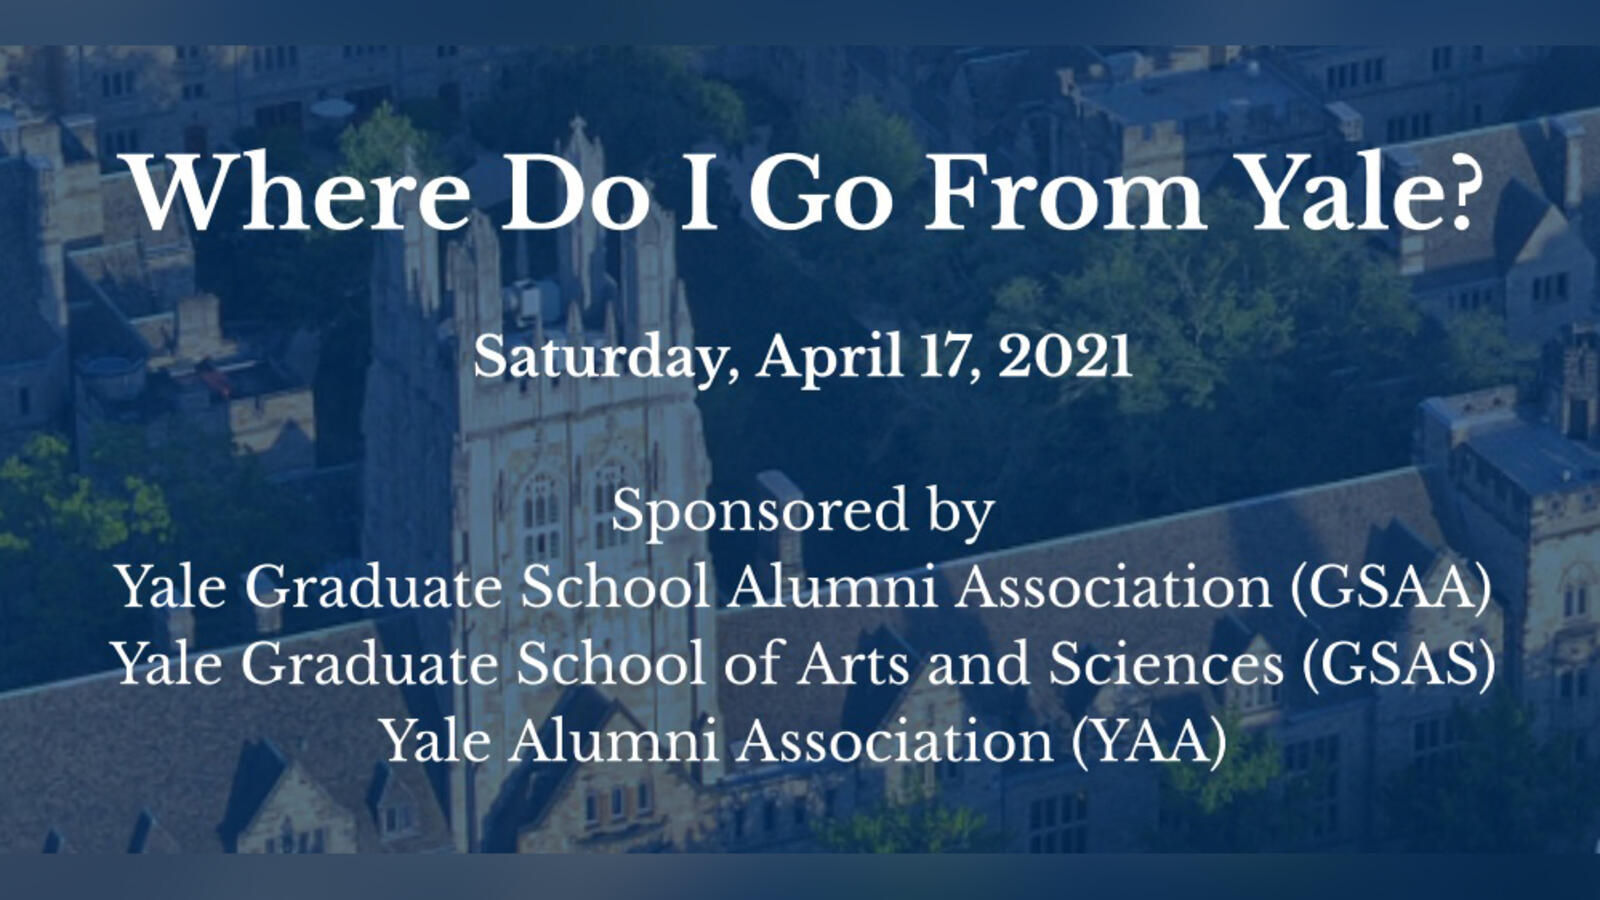 Where Do I Go From Yale?